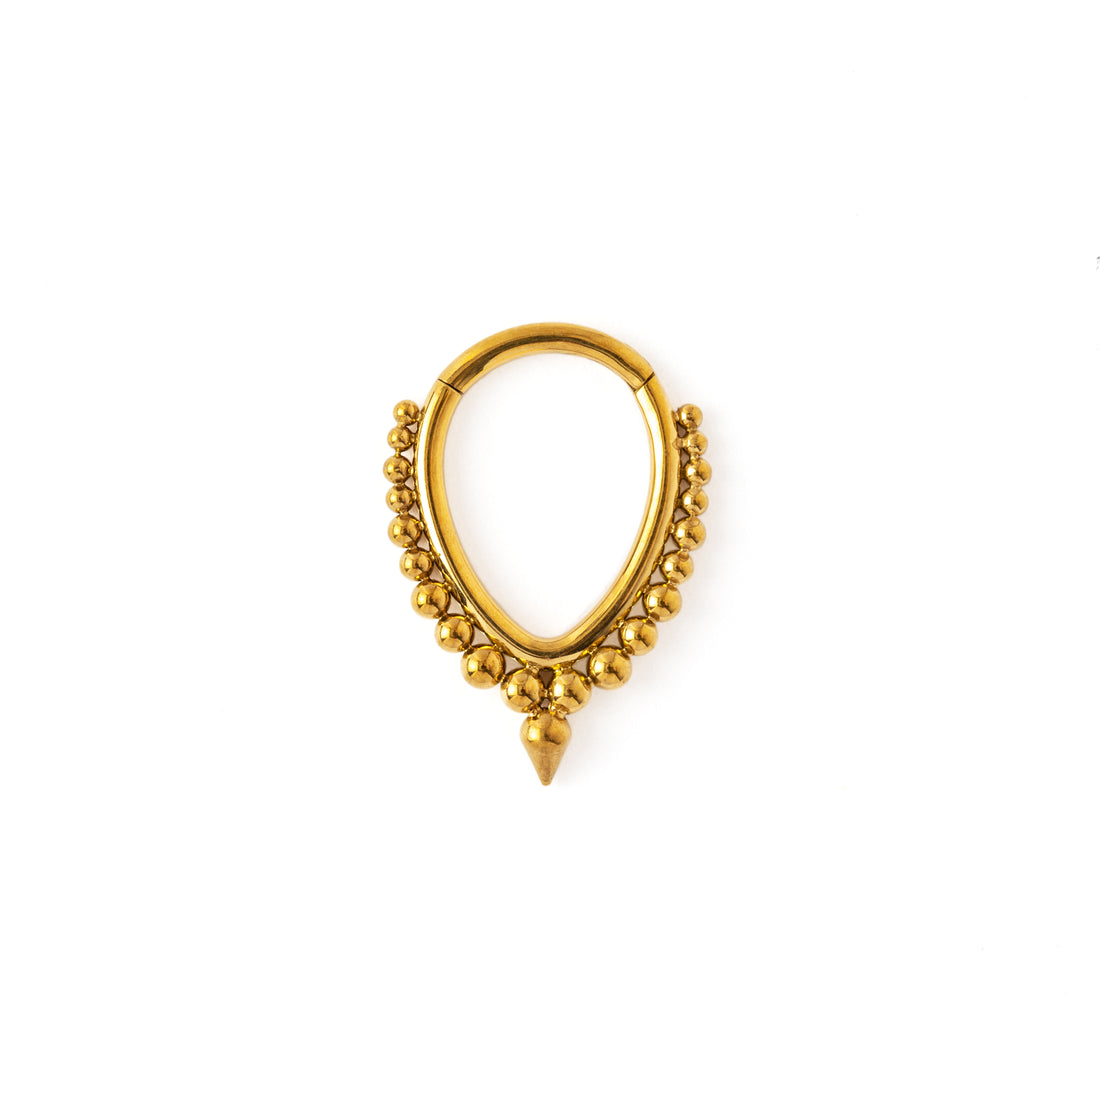 Brenna Golden surgical steel Septum Clicker ring frontal view